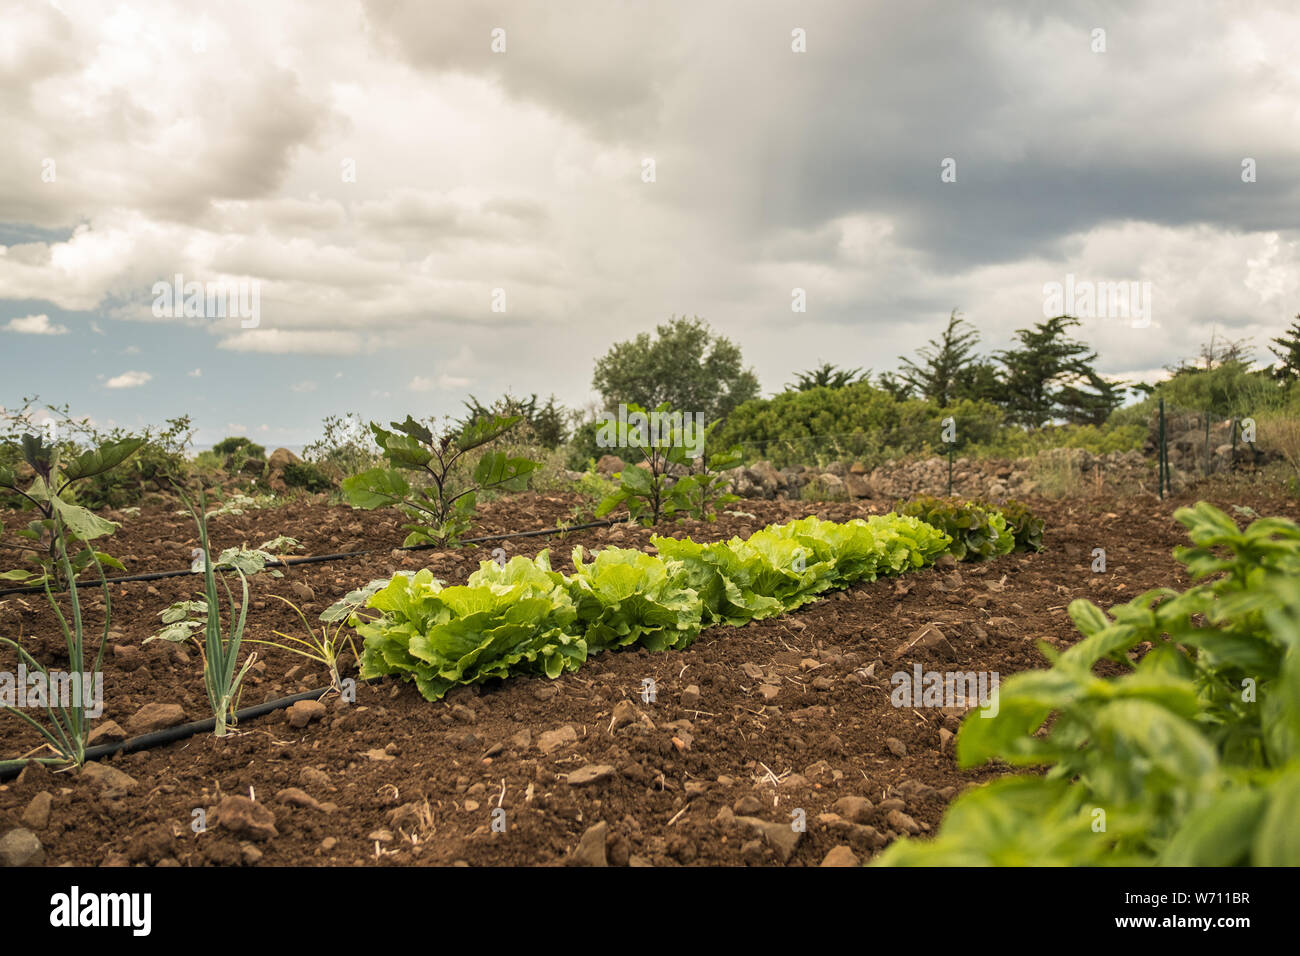 Vegetable garden. Row of fresh lettuces. Agriculture Stock Photo